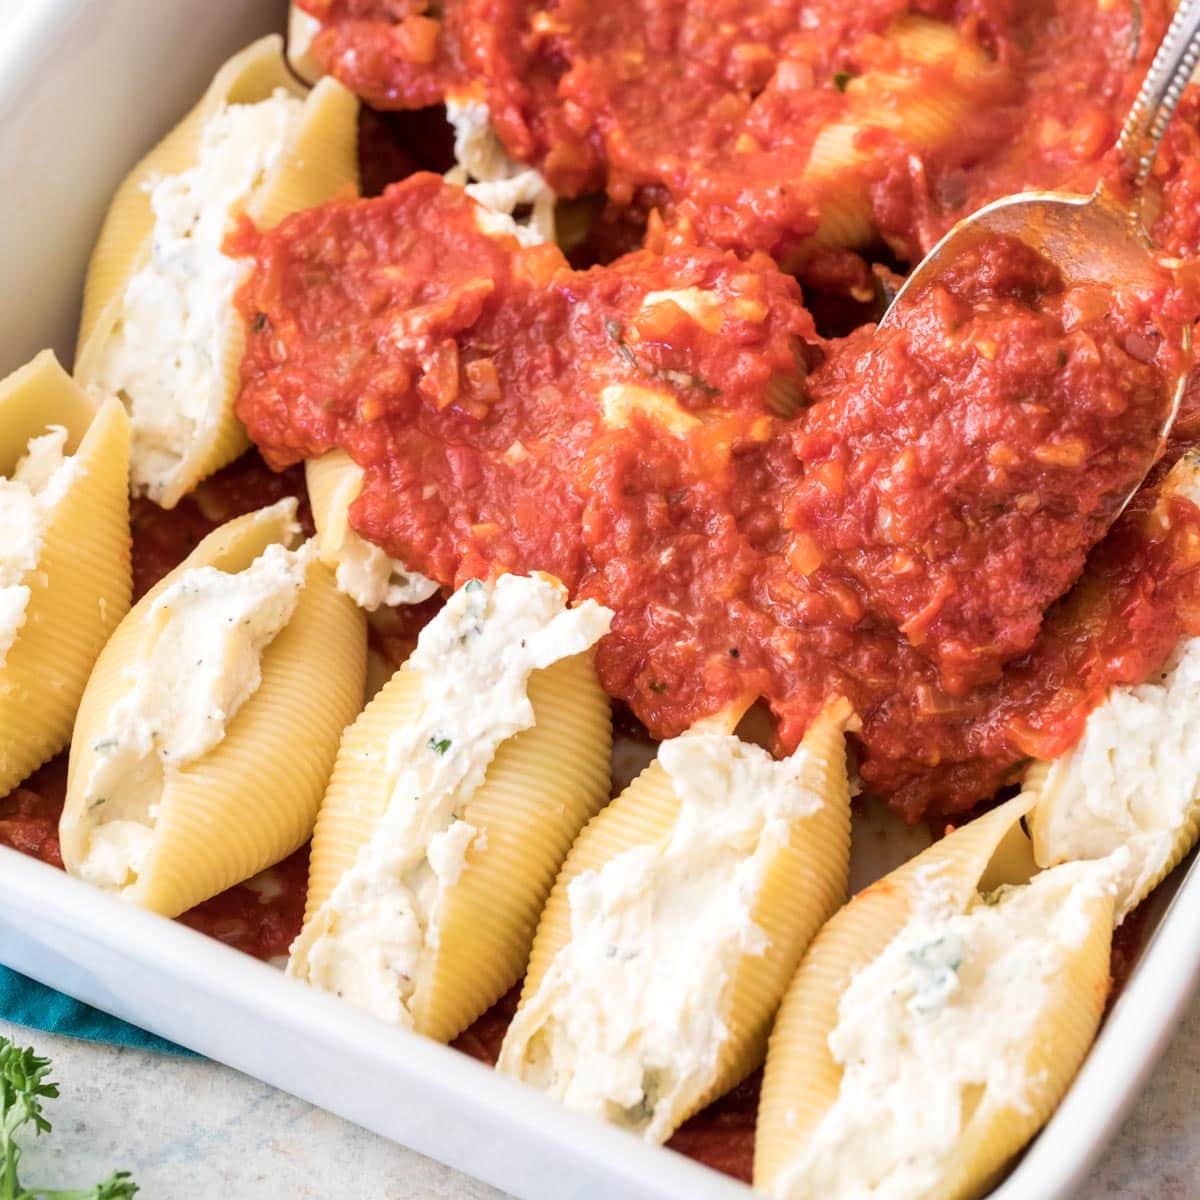 Stuffed Shells - The Cozy Cook